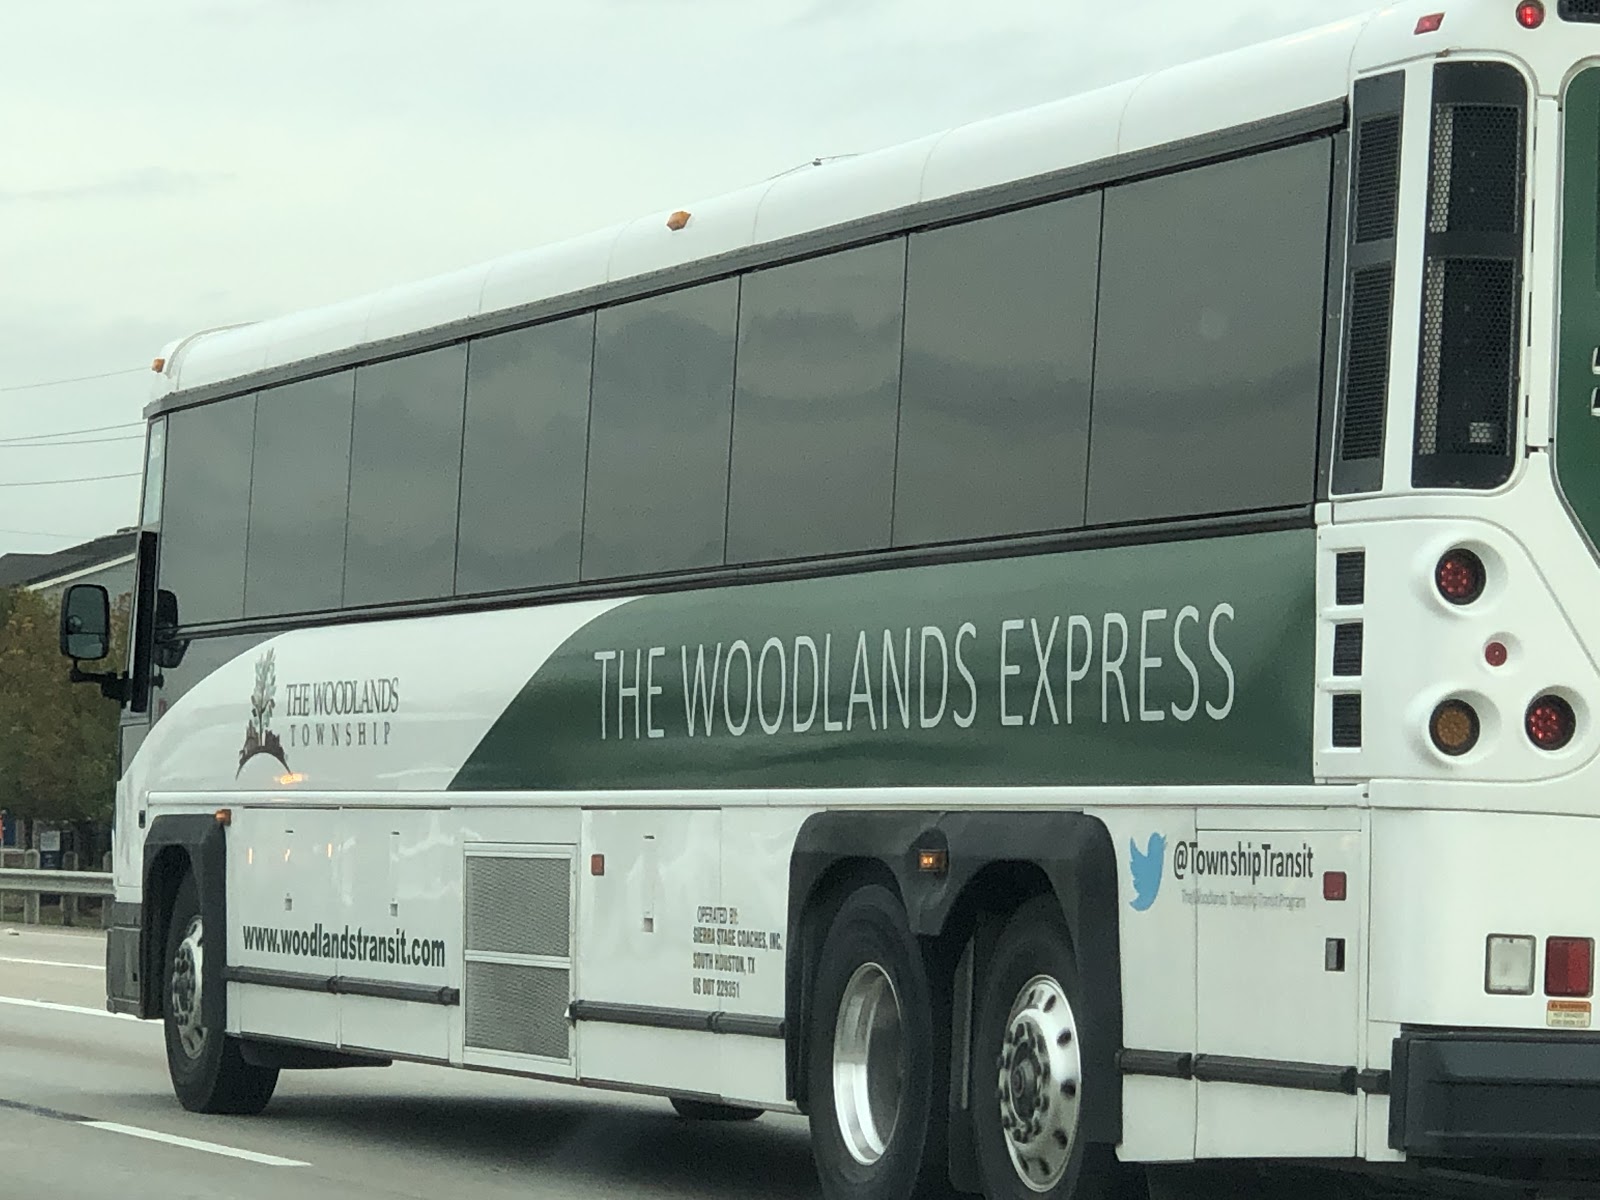 A white passenger bus with tinted windows and a green bar beneath with white text overtop reading "The Woodlands Express"